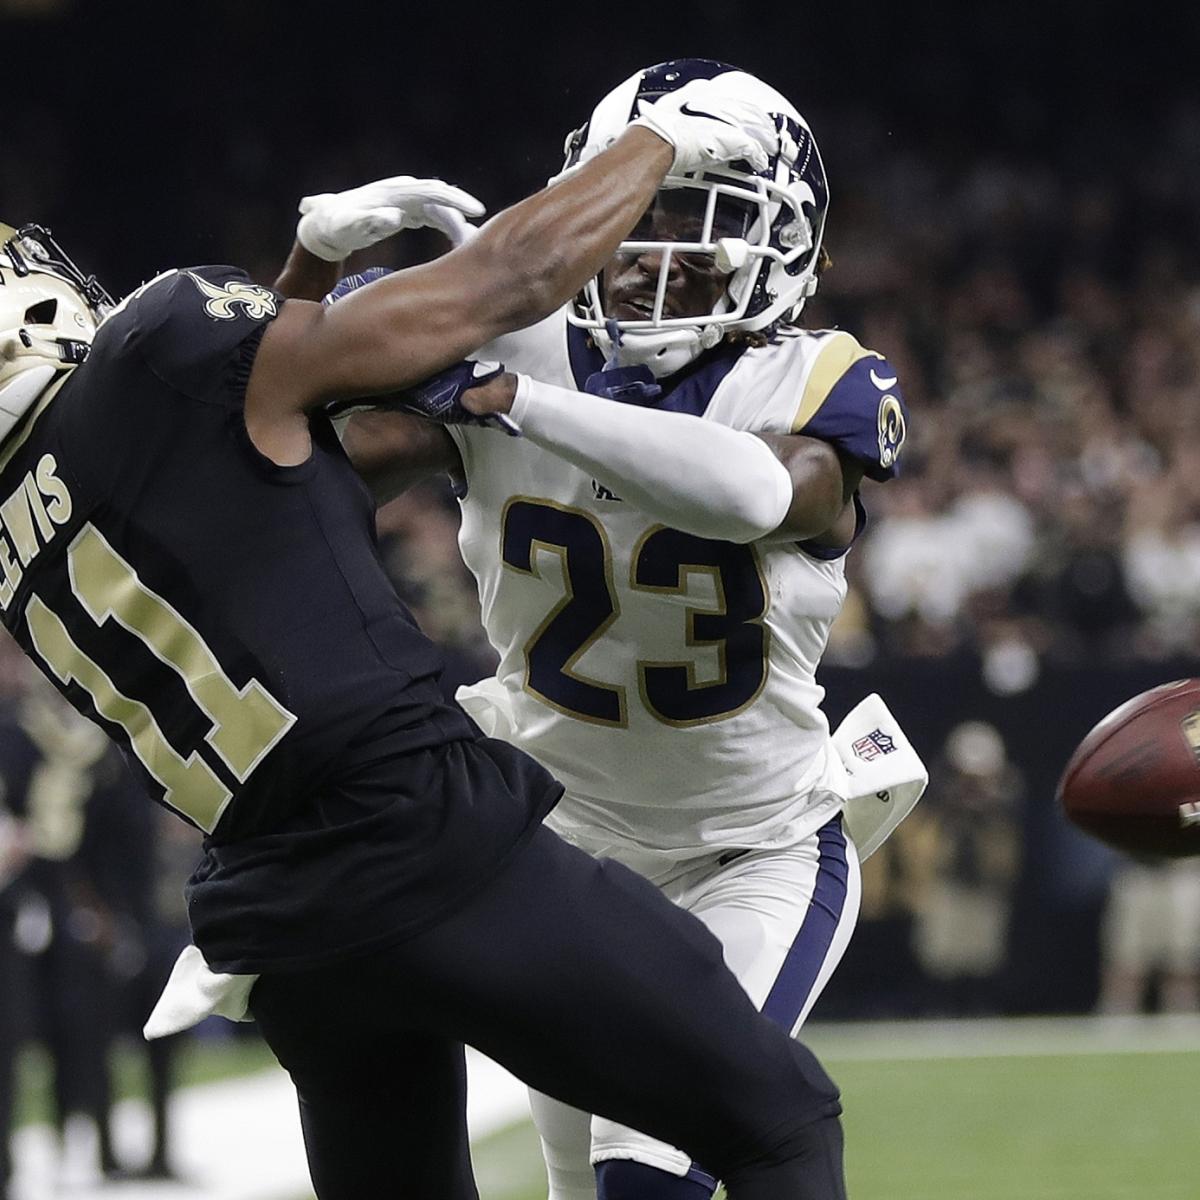 Saints-Rams no-call: What happened, and how it changed the NFL